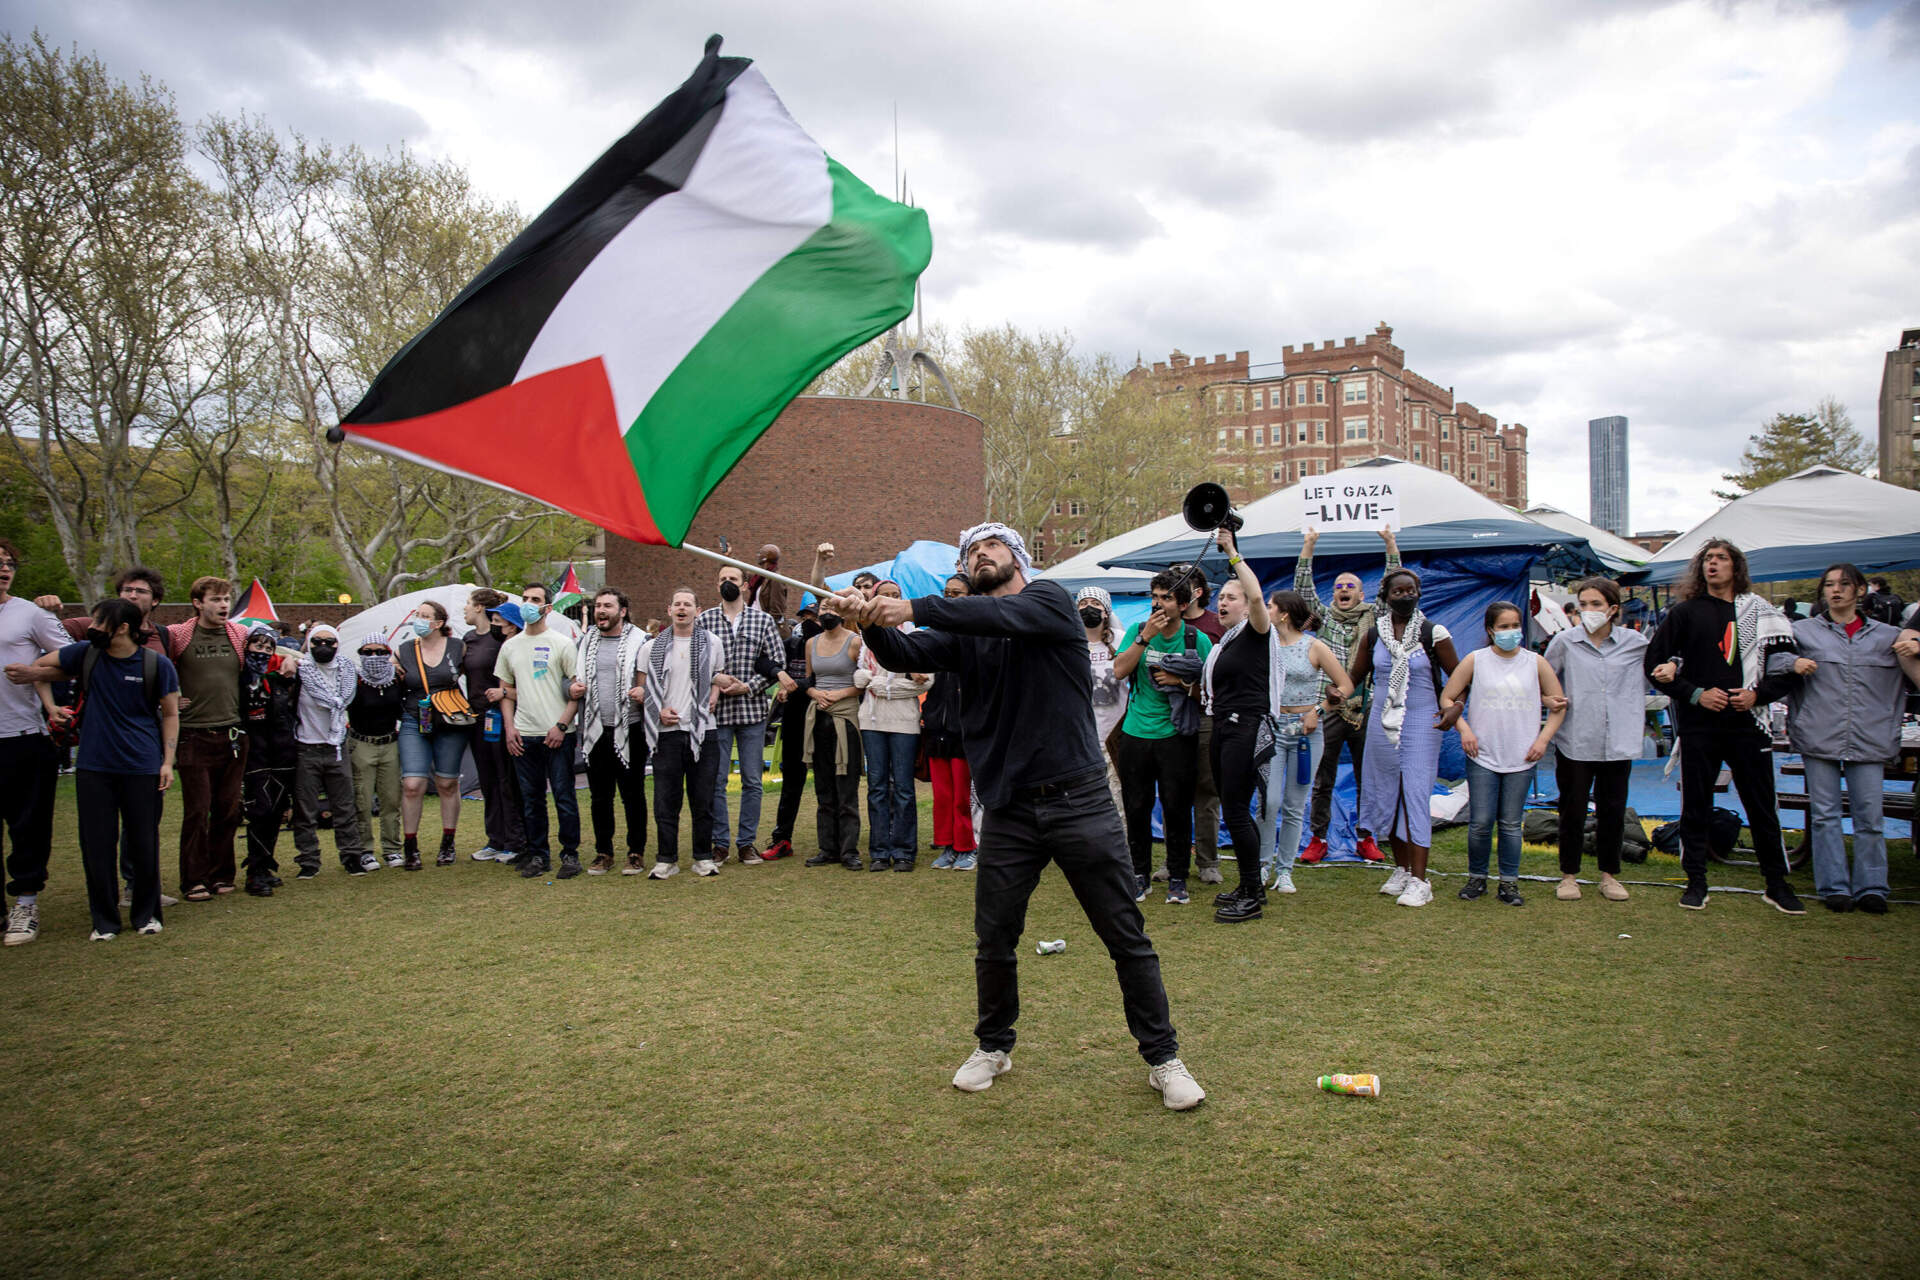 A protester waves a Palestinian flag after demonstrators re-occupy the encampment on MIT's Kresge Lawn. (Robin Lubbock/WBUR)